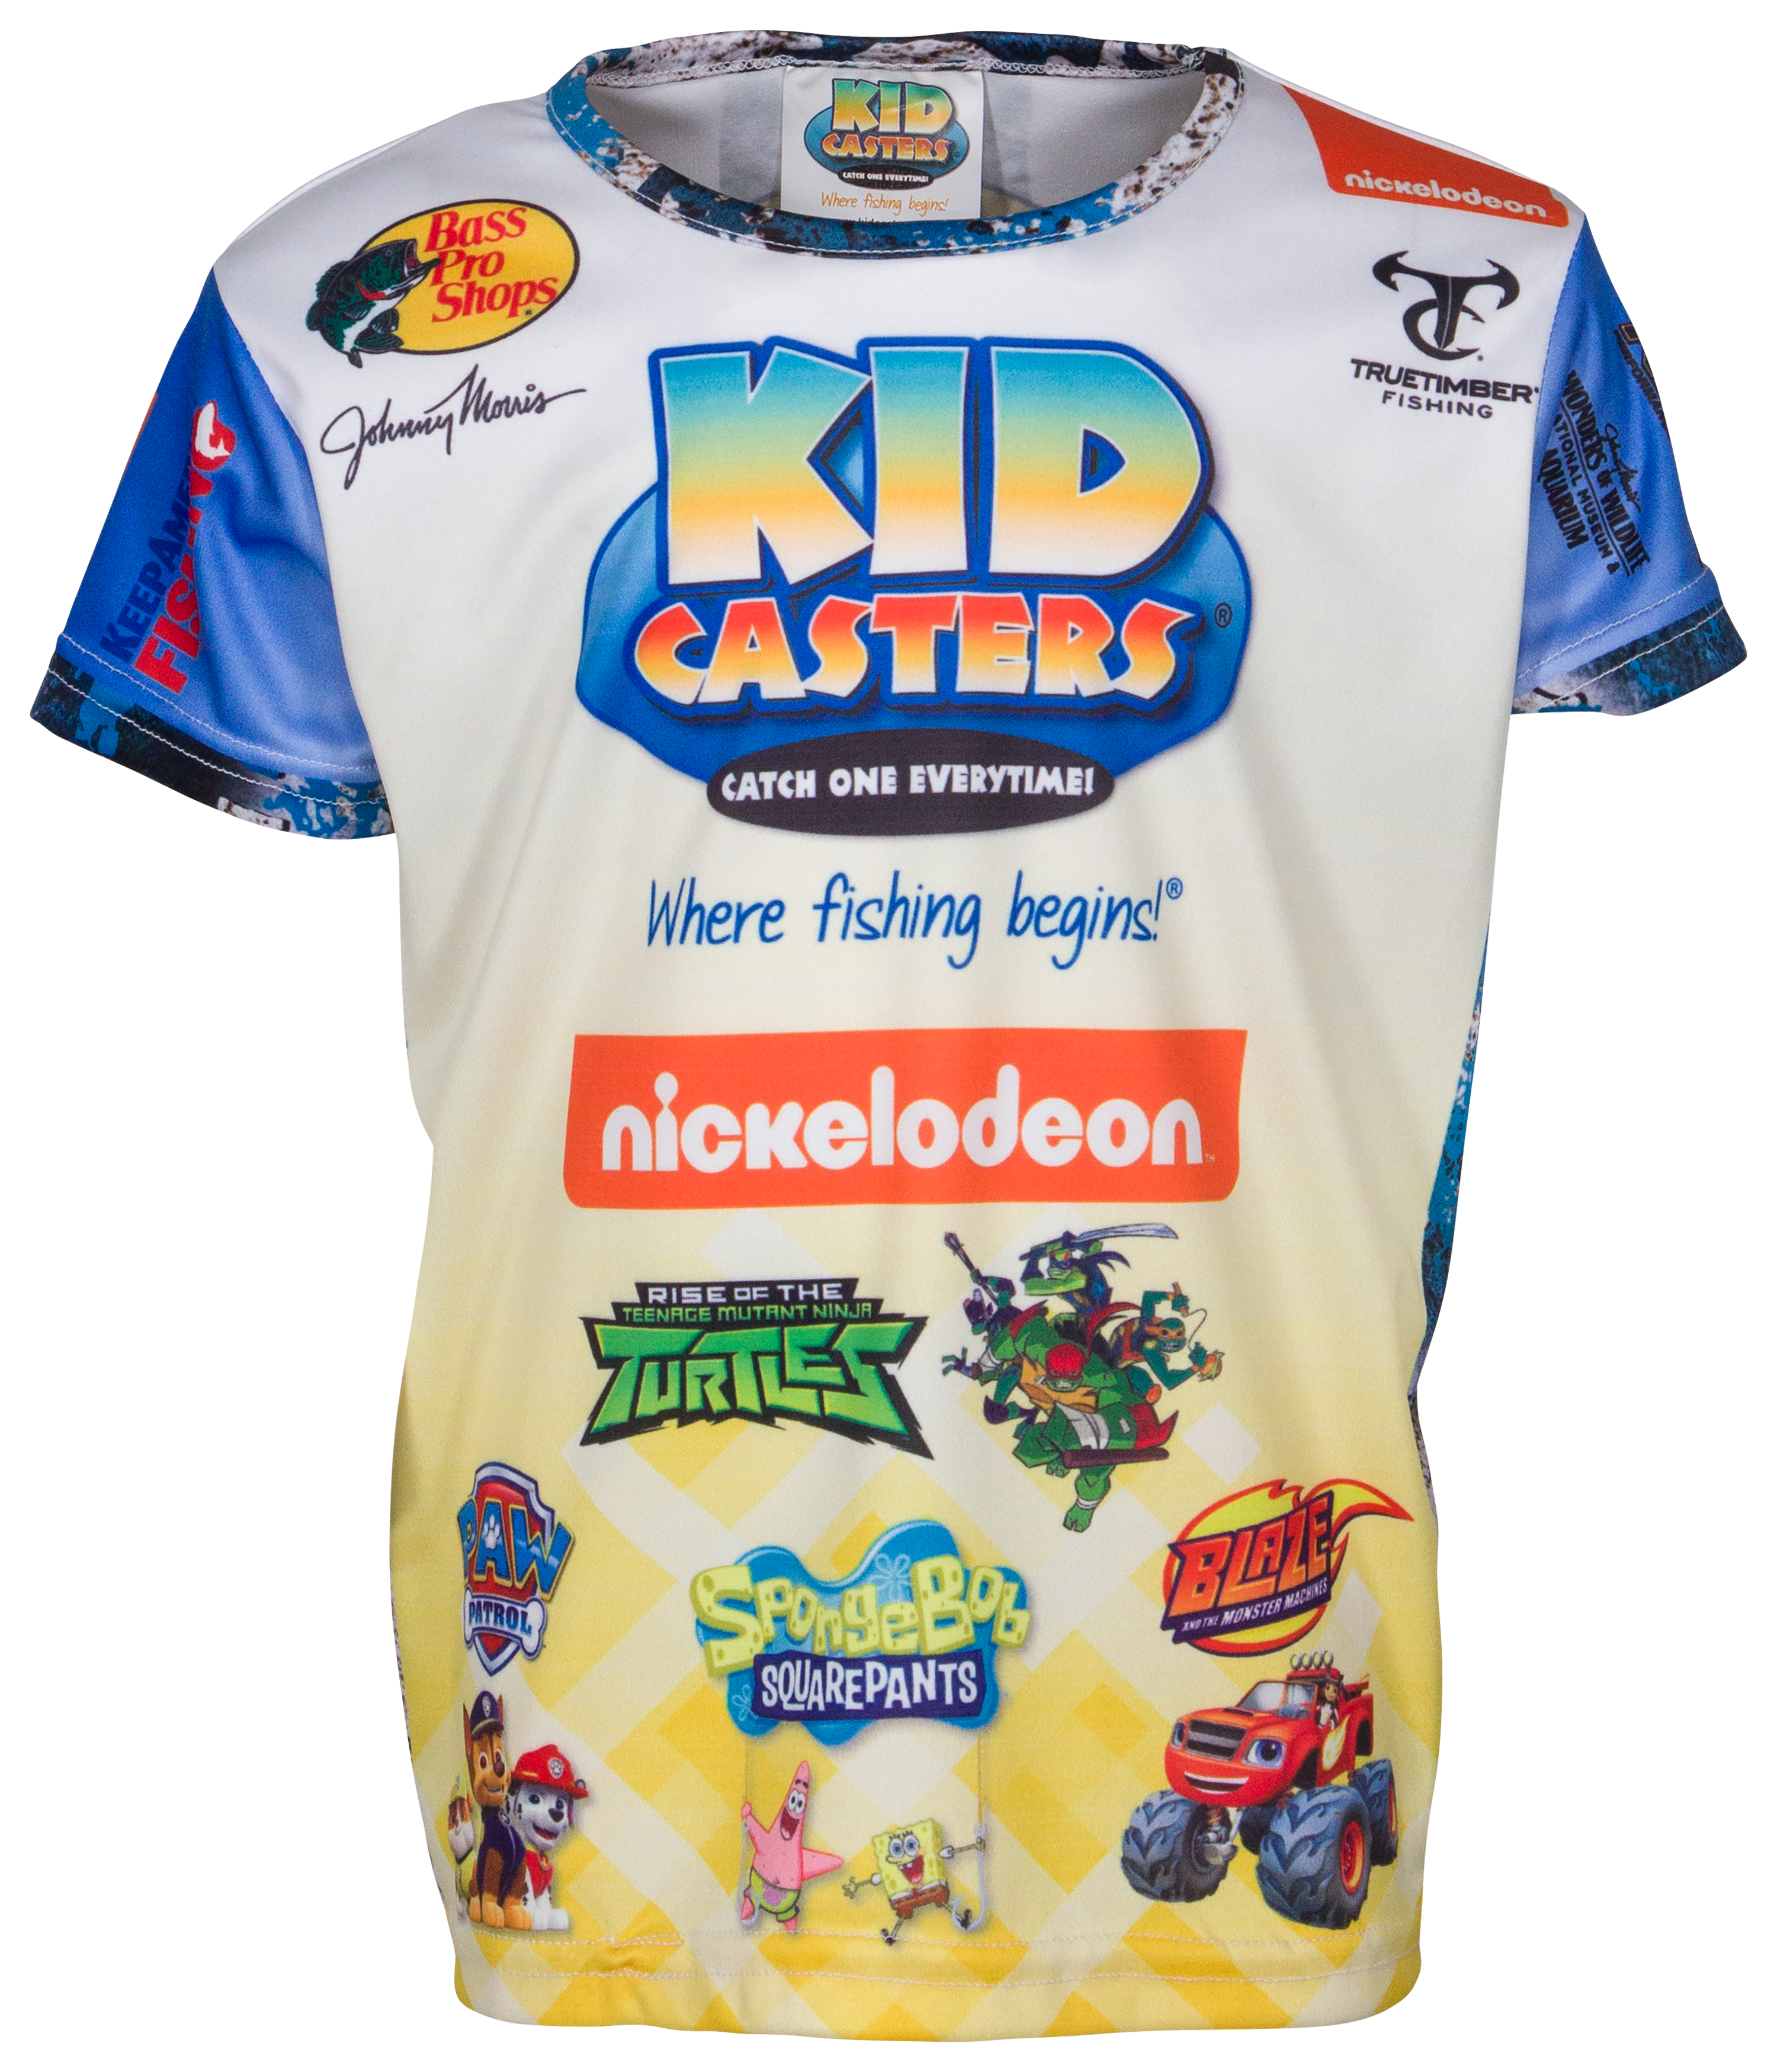 Bass Pro Shops Kid Casters Fishing Short-Sleeve Shirt for Toddlers or Boys